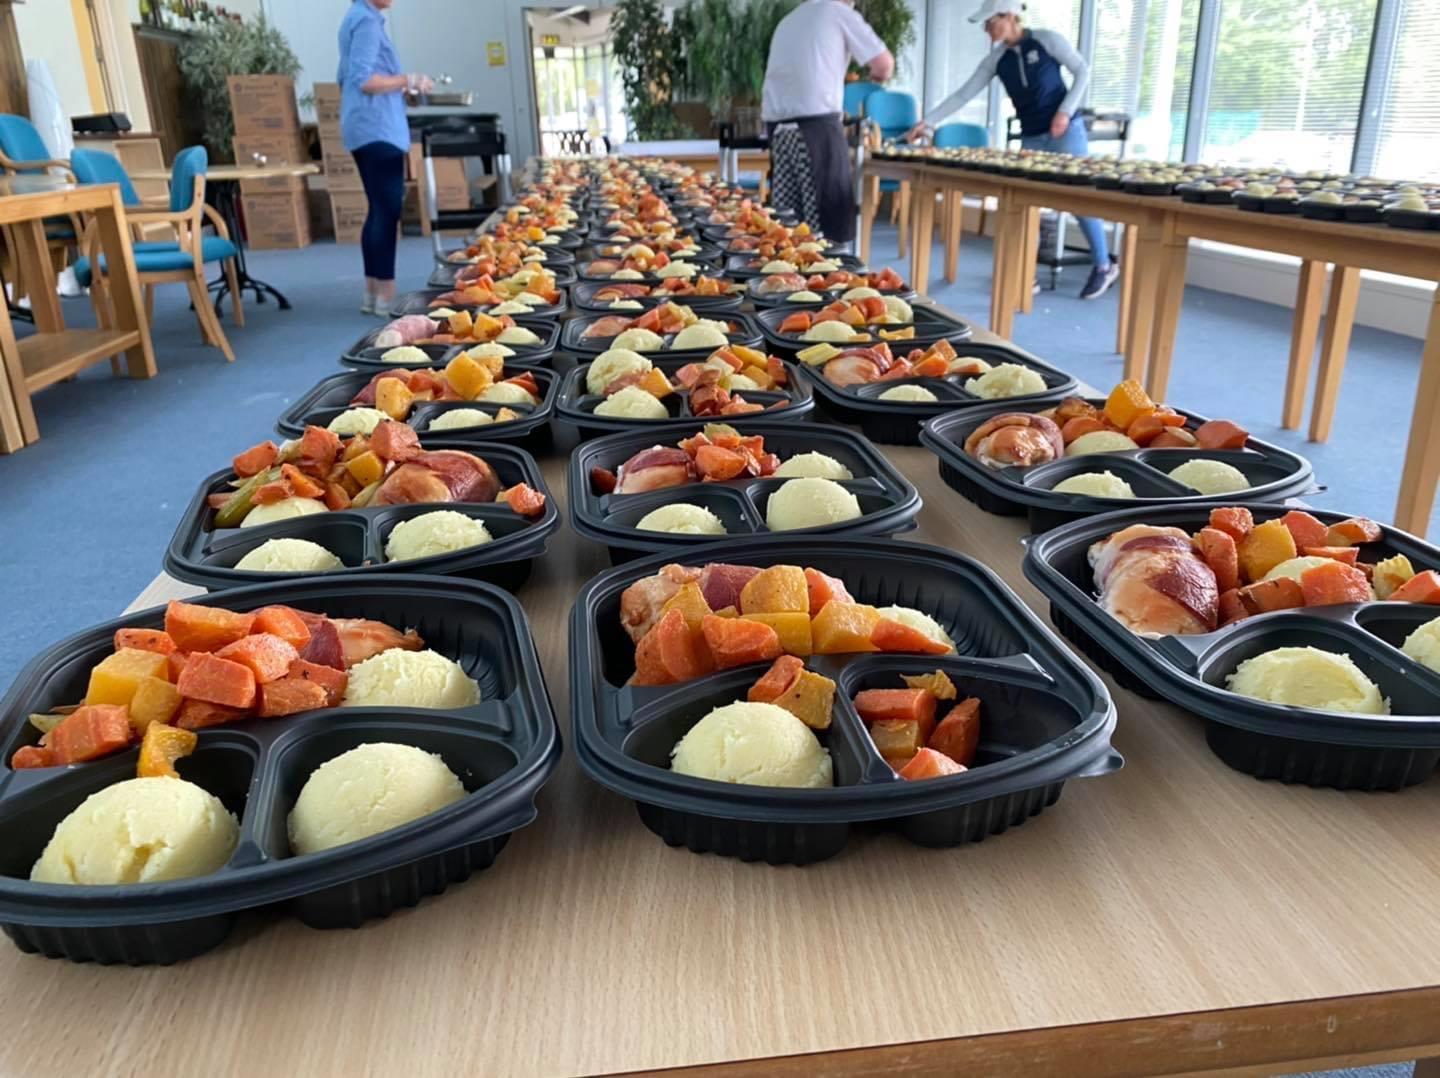 Volunteers at Meals on Wheels Tralee prepare the meals ahead of delivery to the clients.